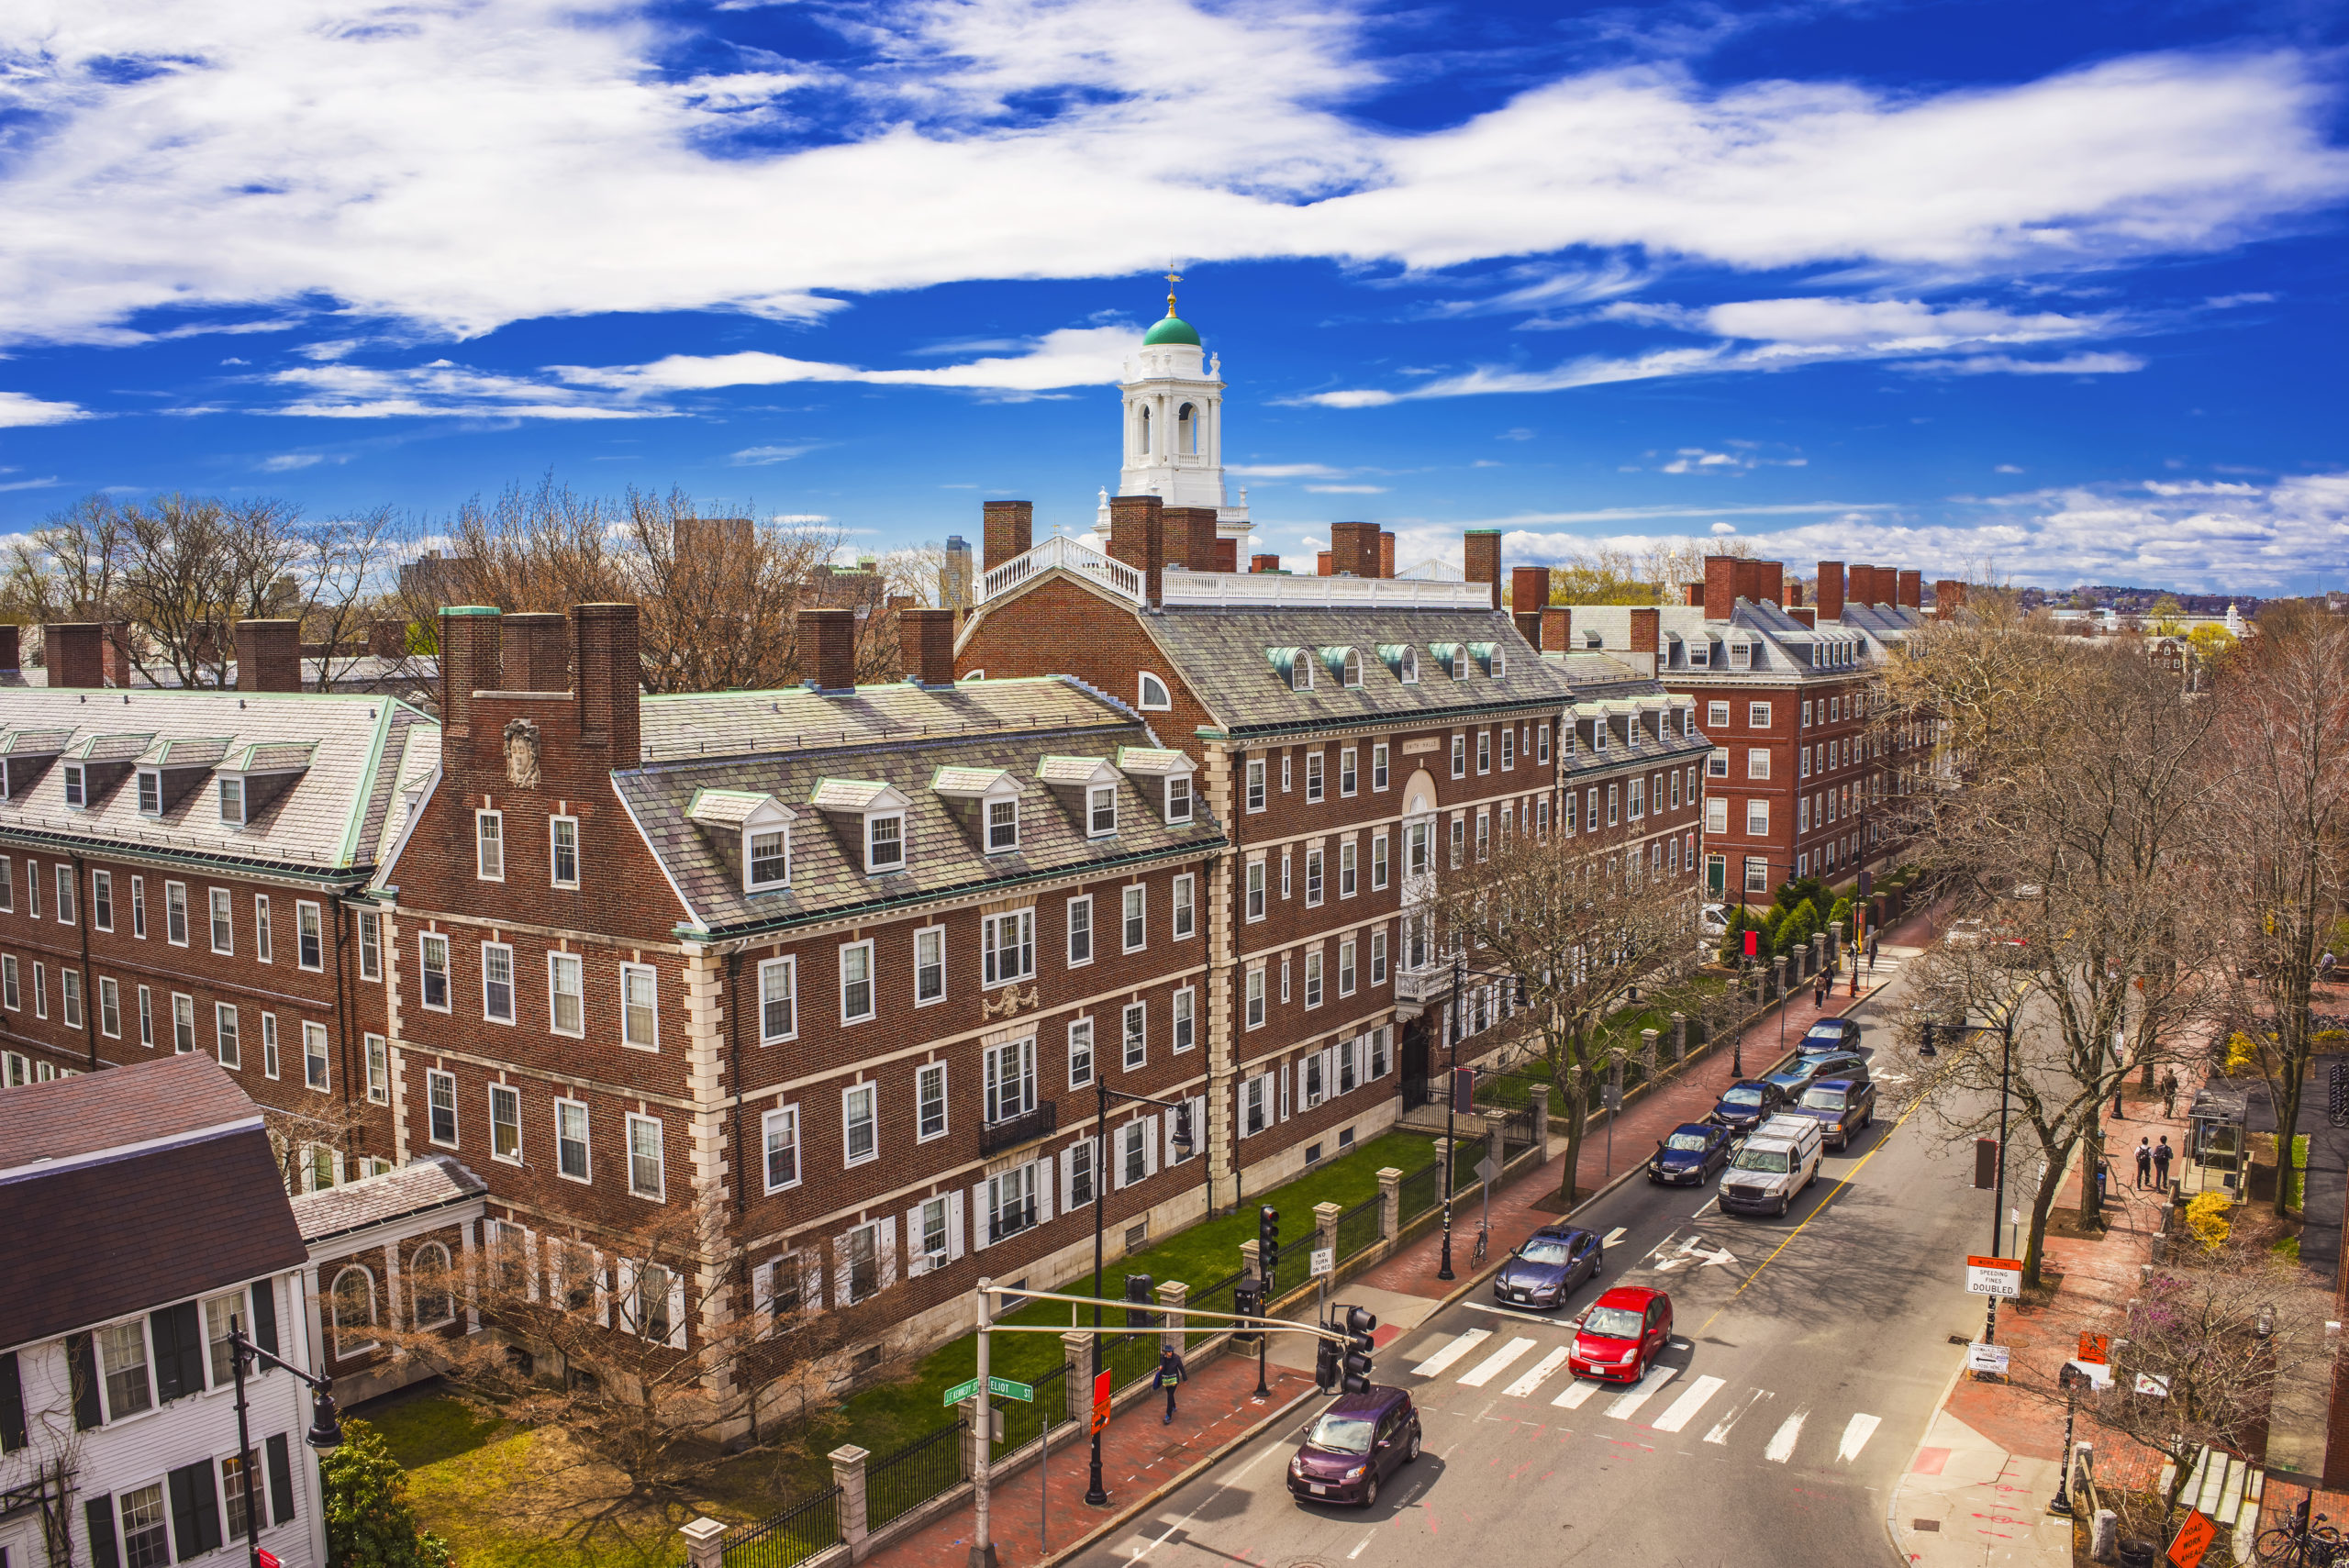 Aerial view on John Kennedy Street in the Harvard University Area in Cambridge, Massachusetts, the USA. Eliot House white belltower seen on the background. Tourists in the street.